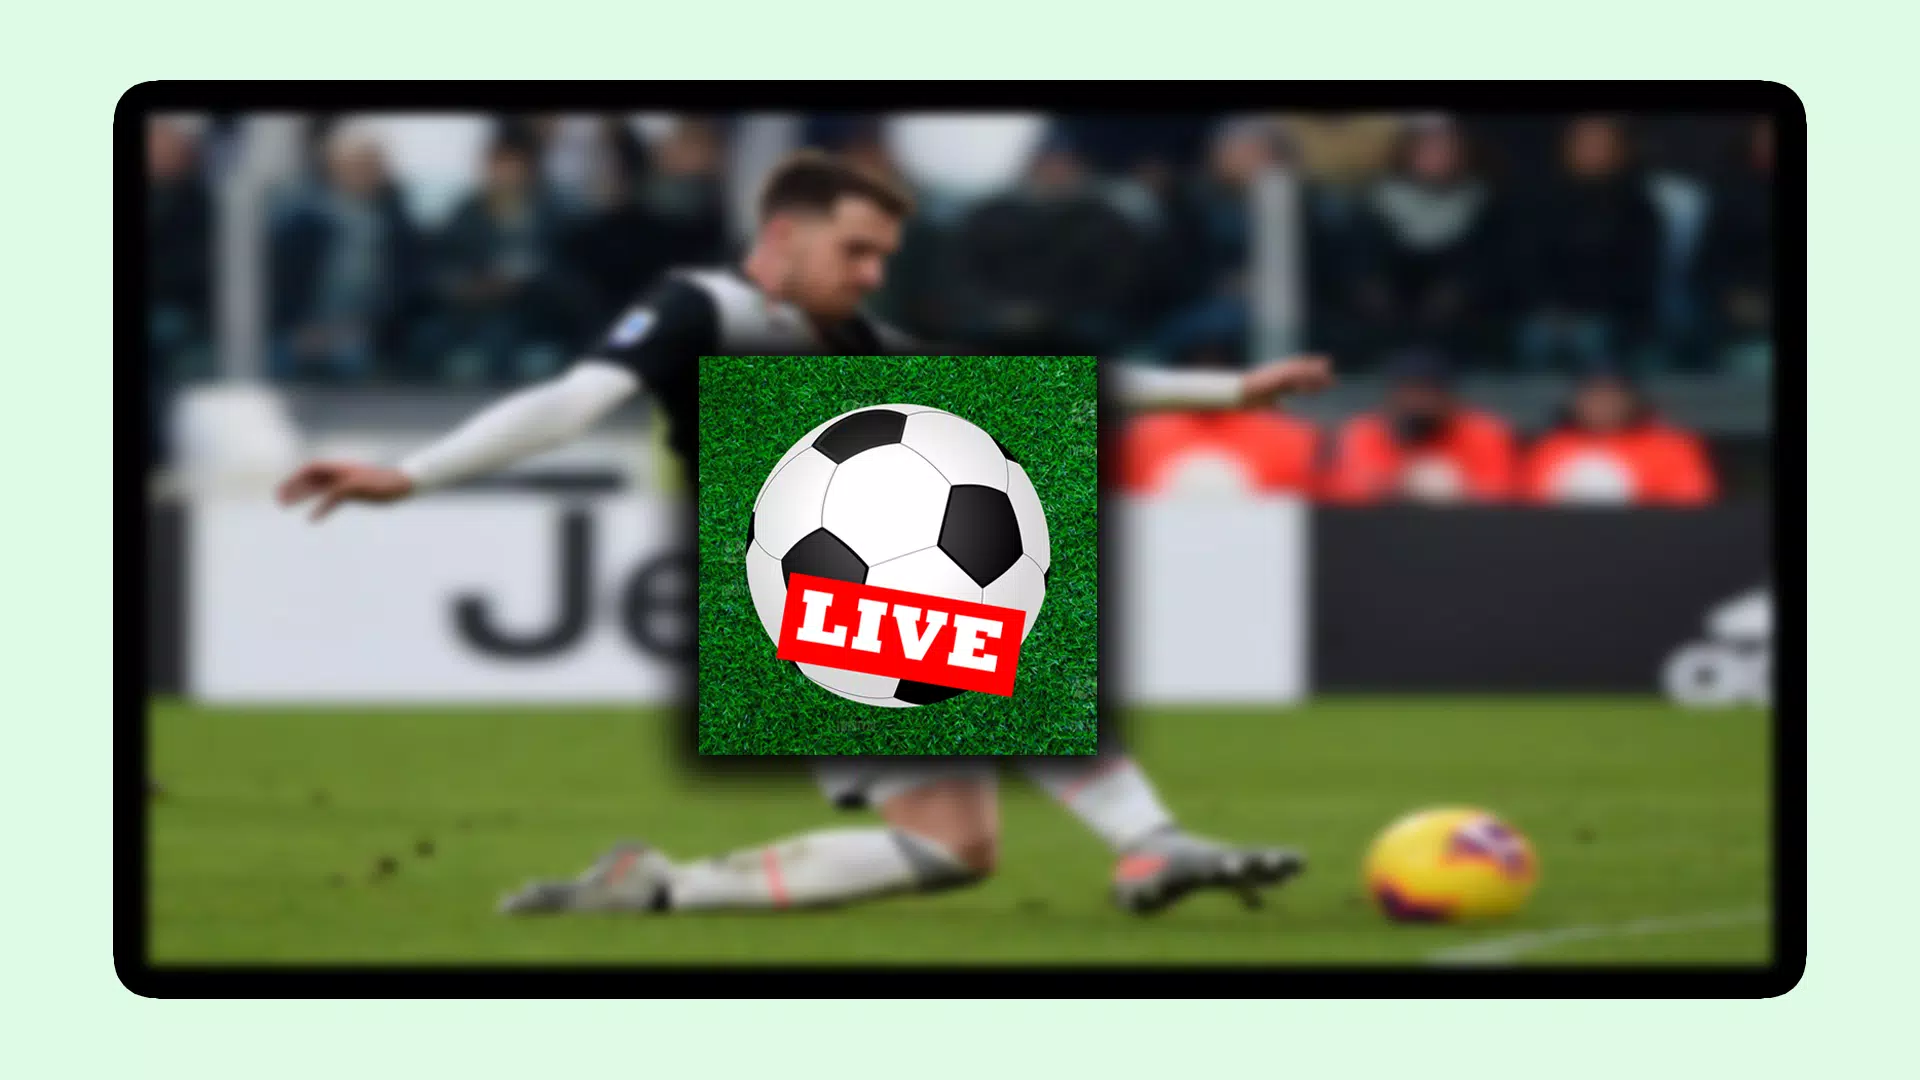 Download Soccer App: Experience Live Football Scores